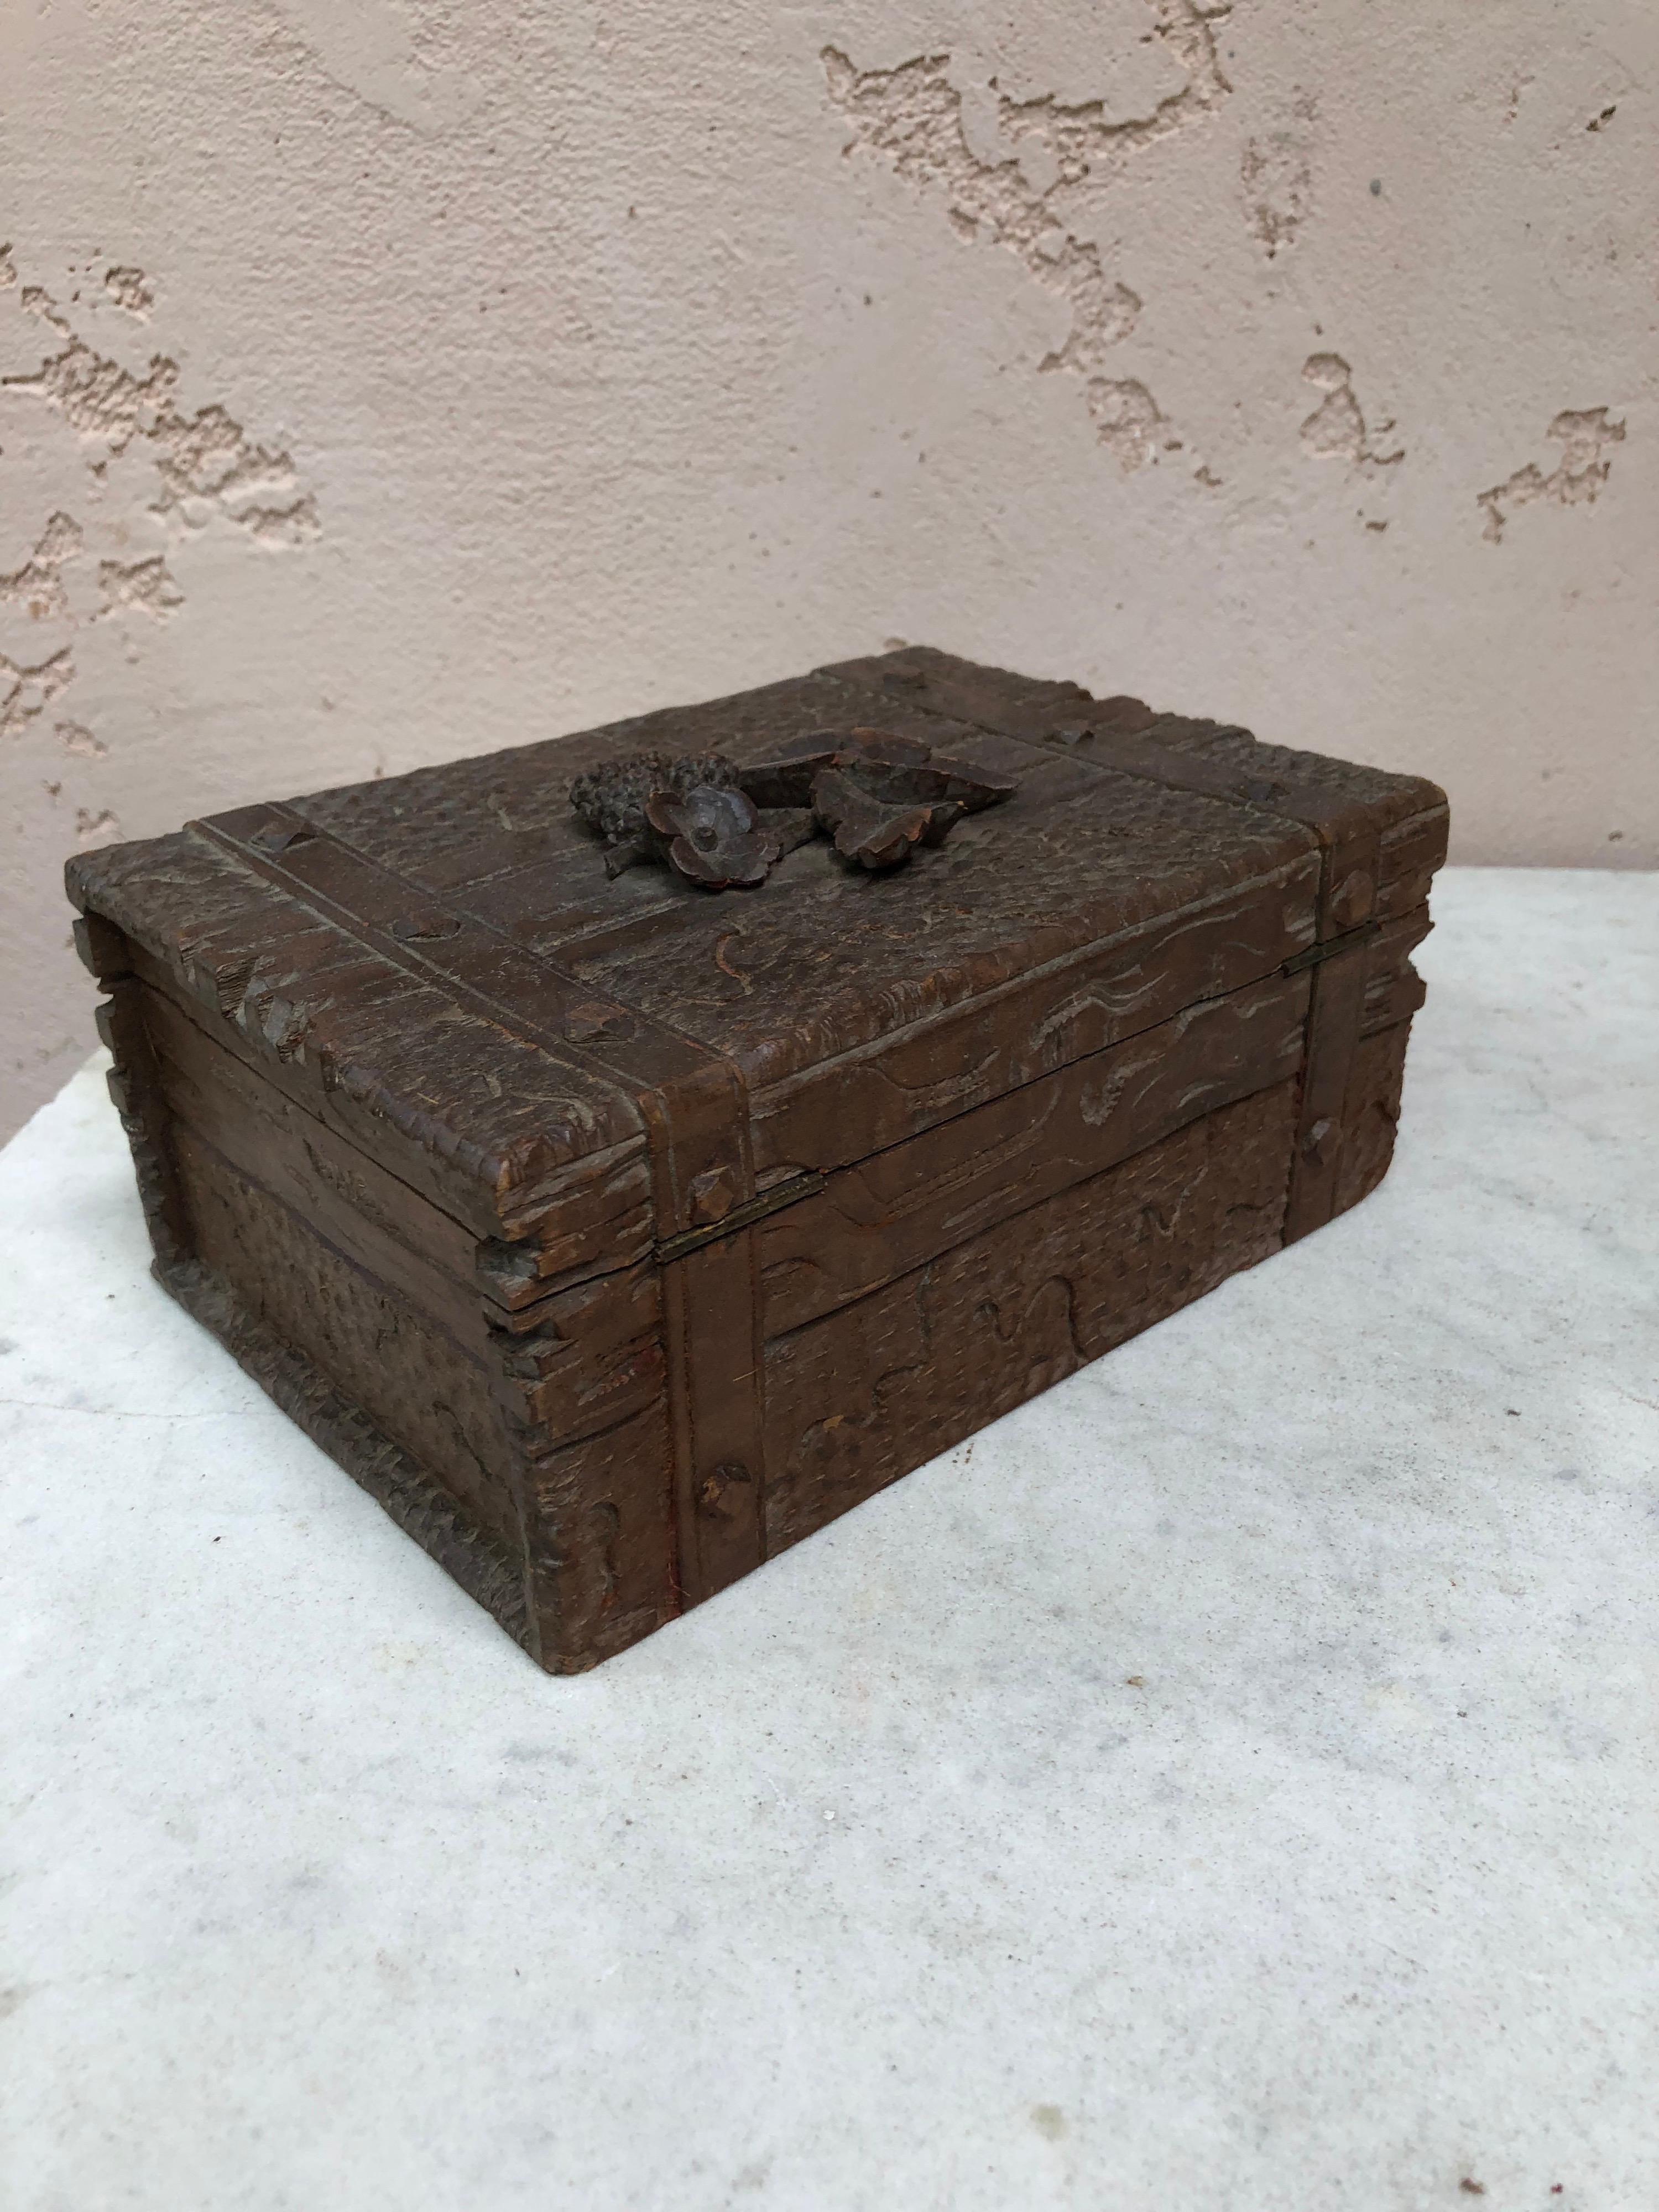 Early 20th Century French Black Forest Wood Box with Blackberries, circa 1900